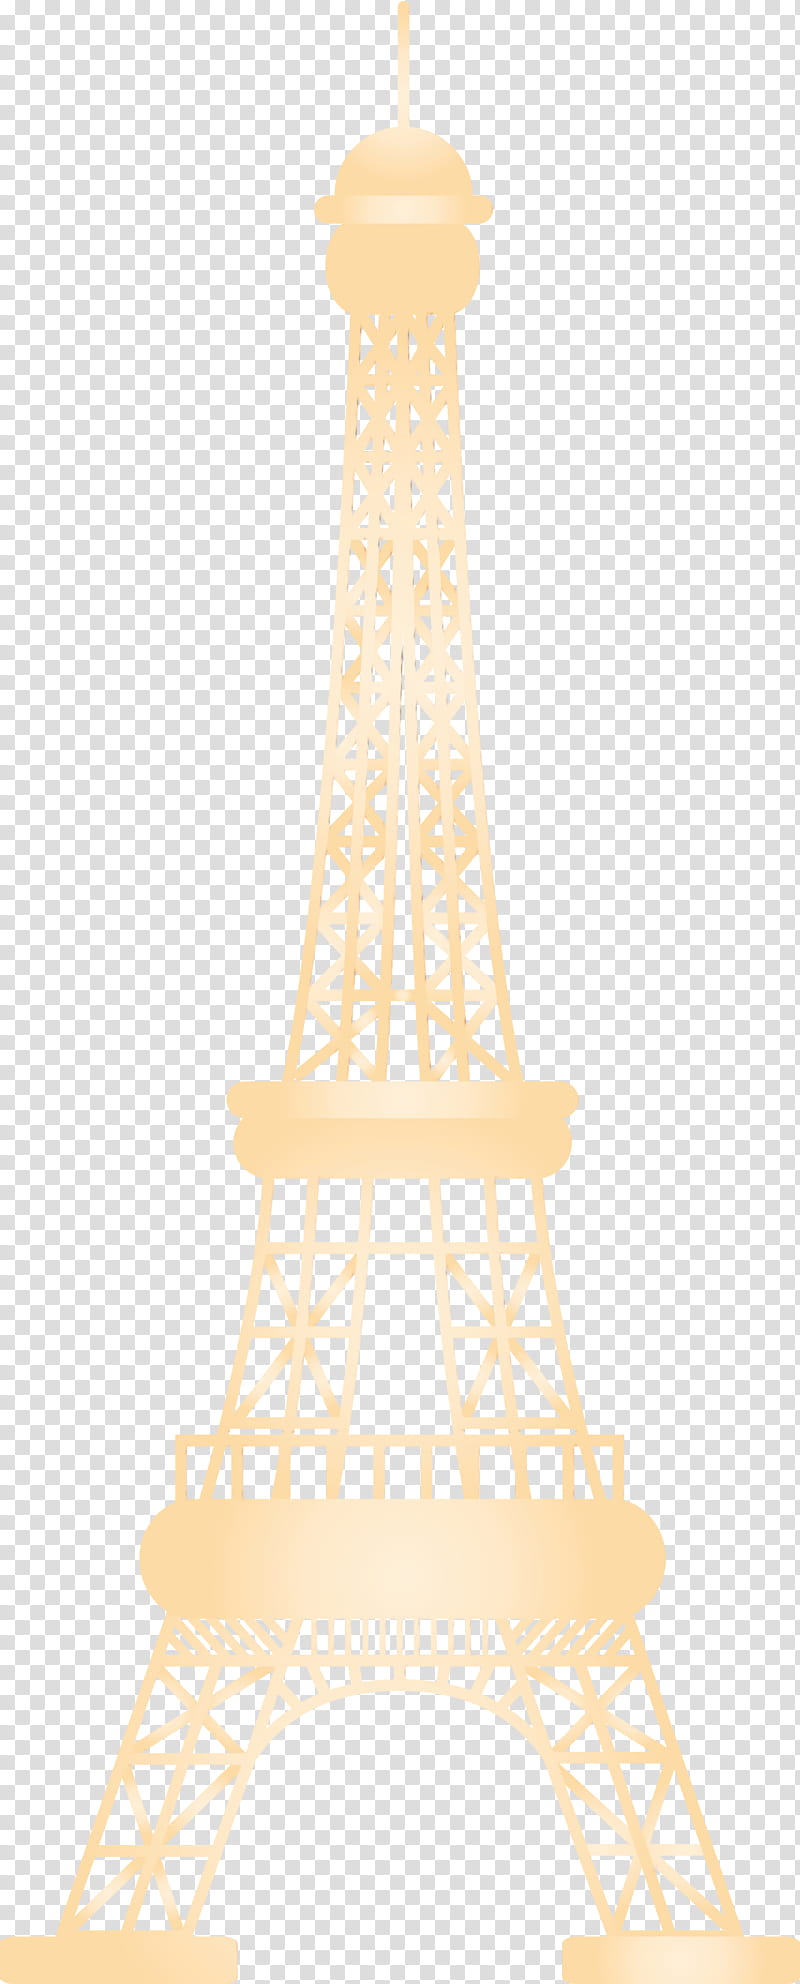 klcc east gate tower meter font tower, Watercolor, Paint, Wet Ink transparent background PNG clipart